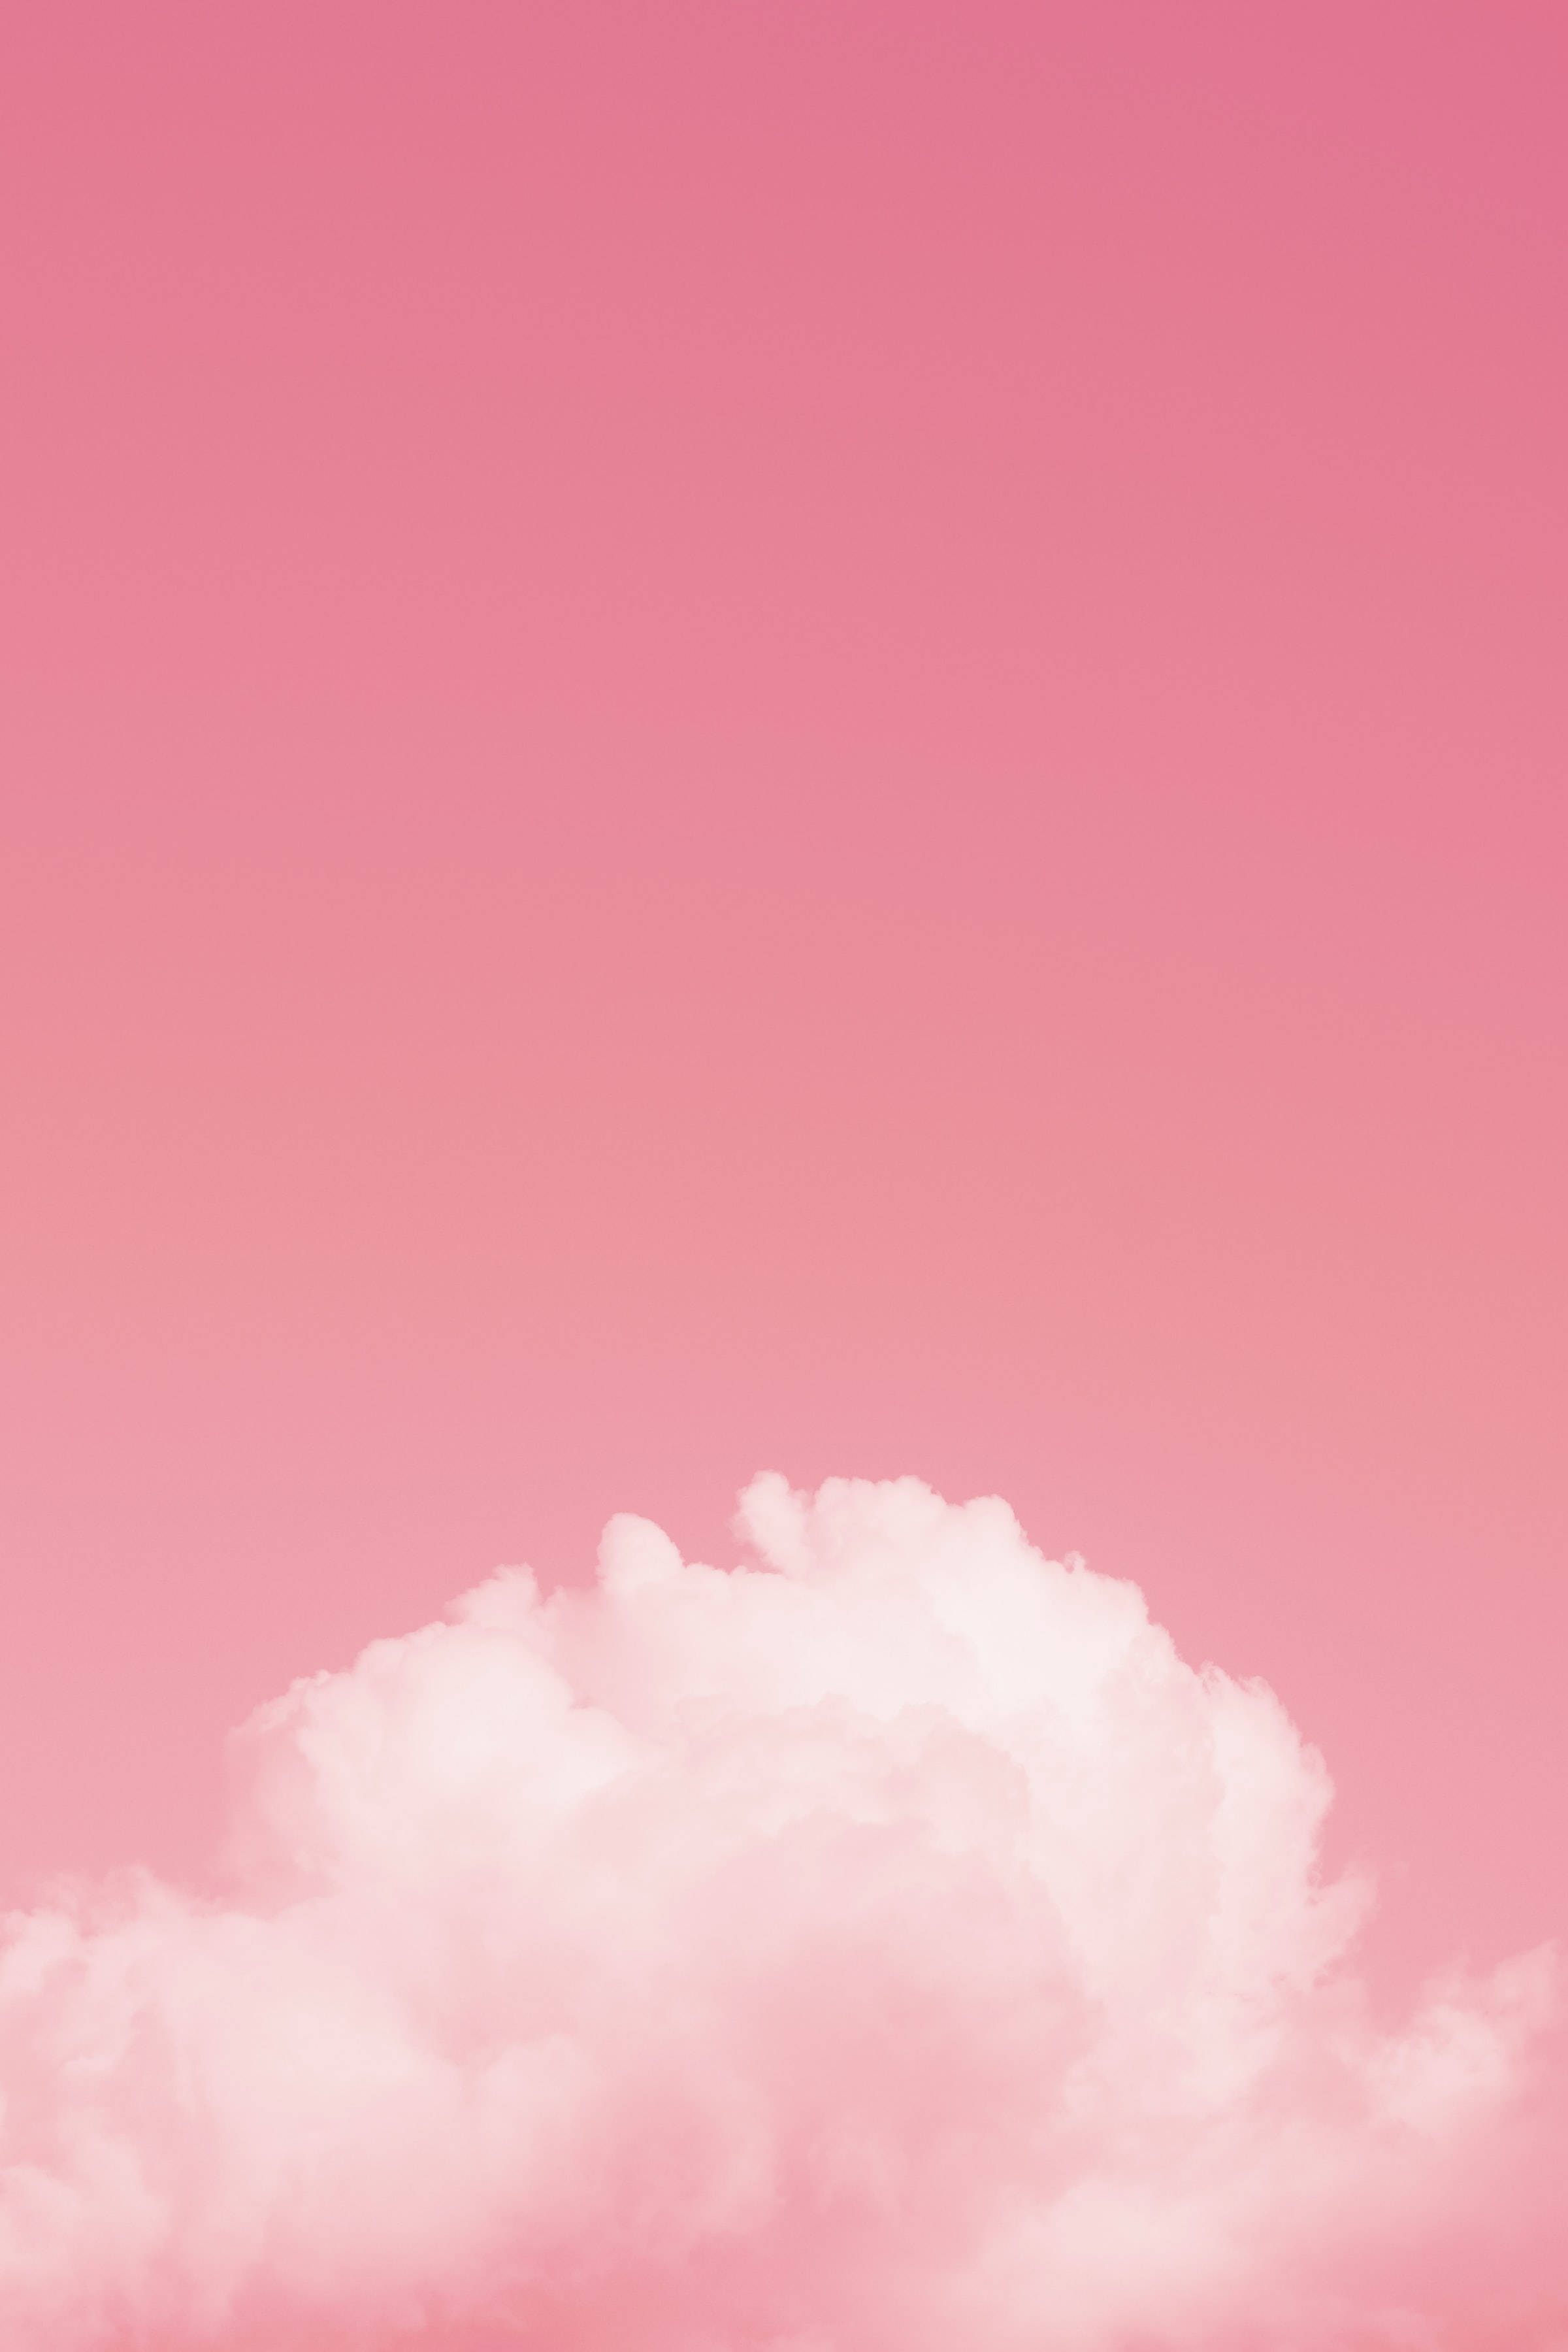 Cute Pink Aesthetic White Fluffy Cloud Background